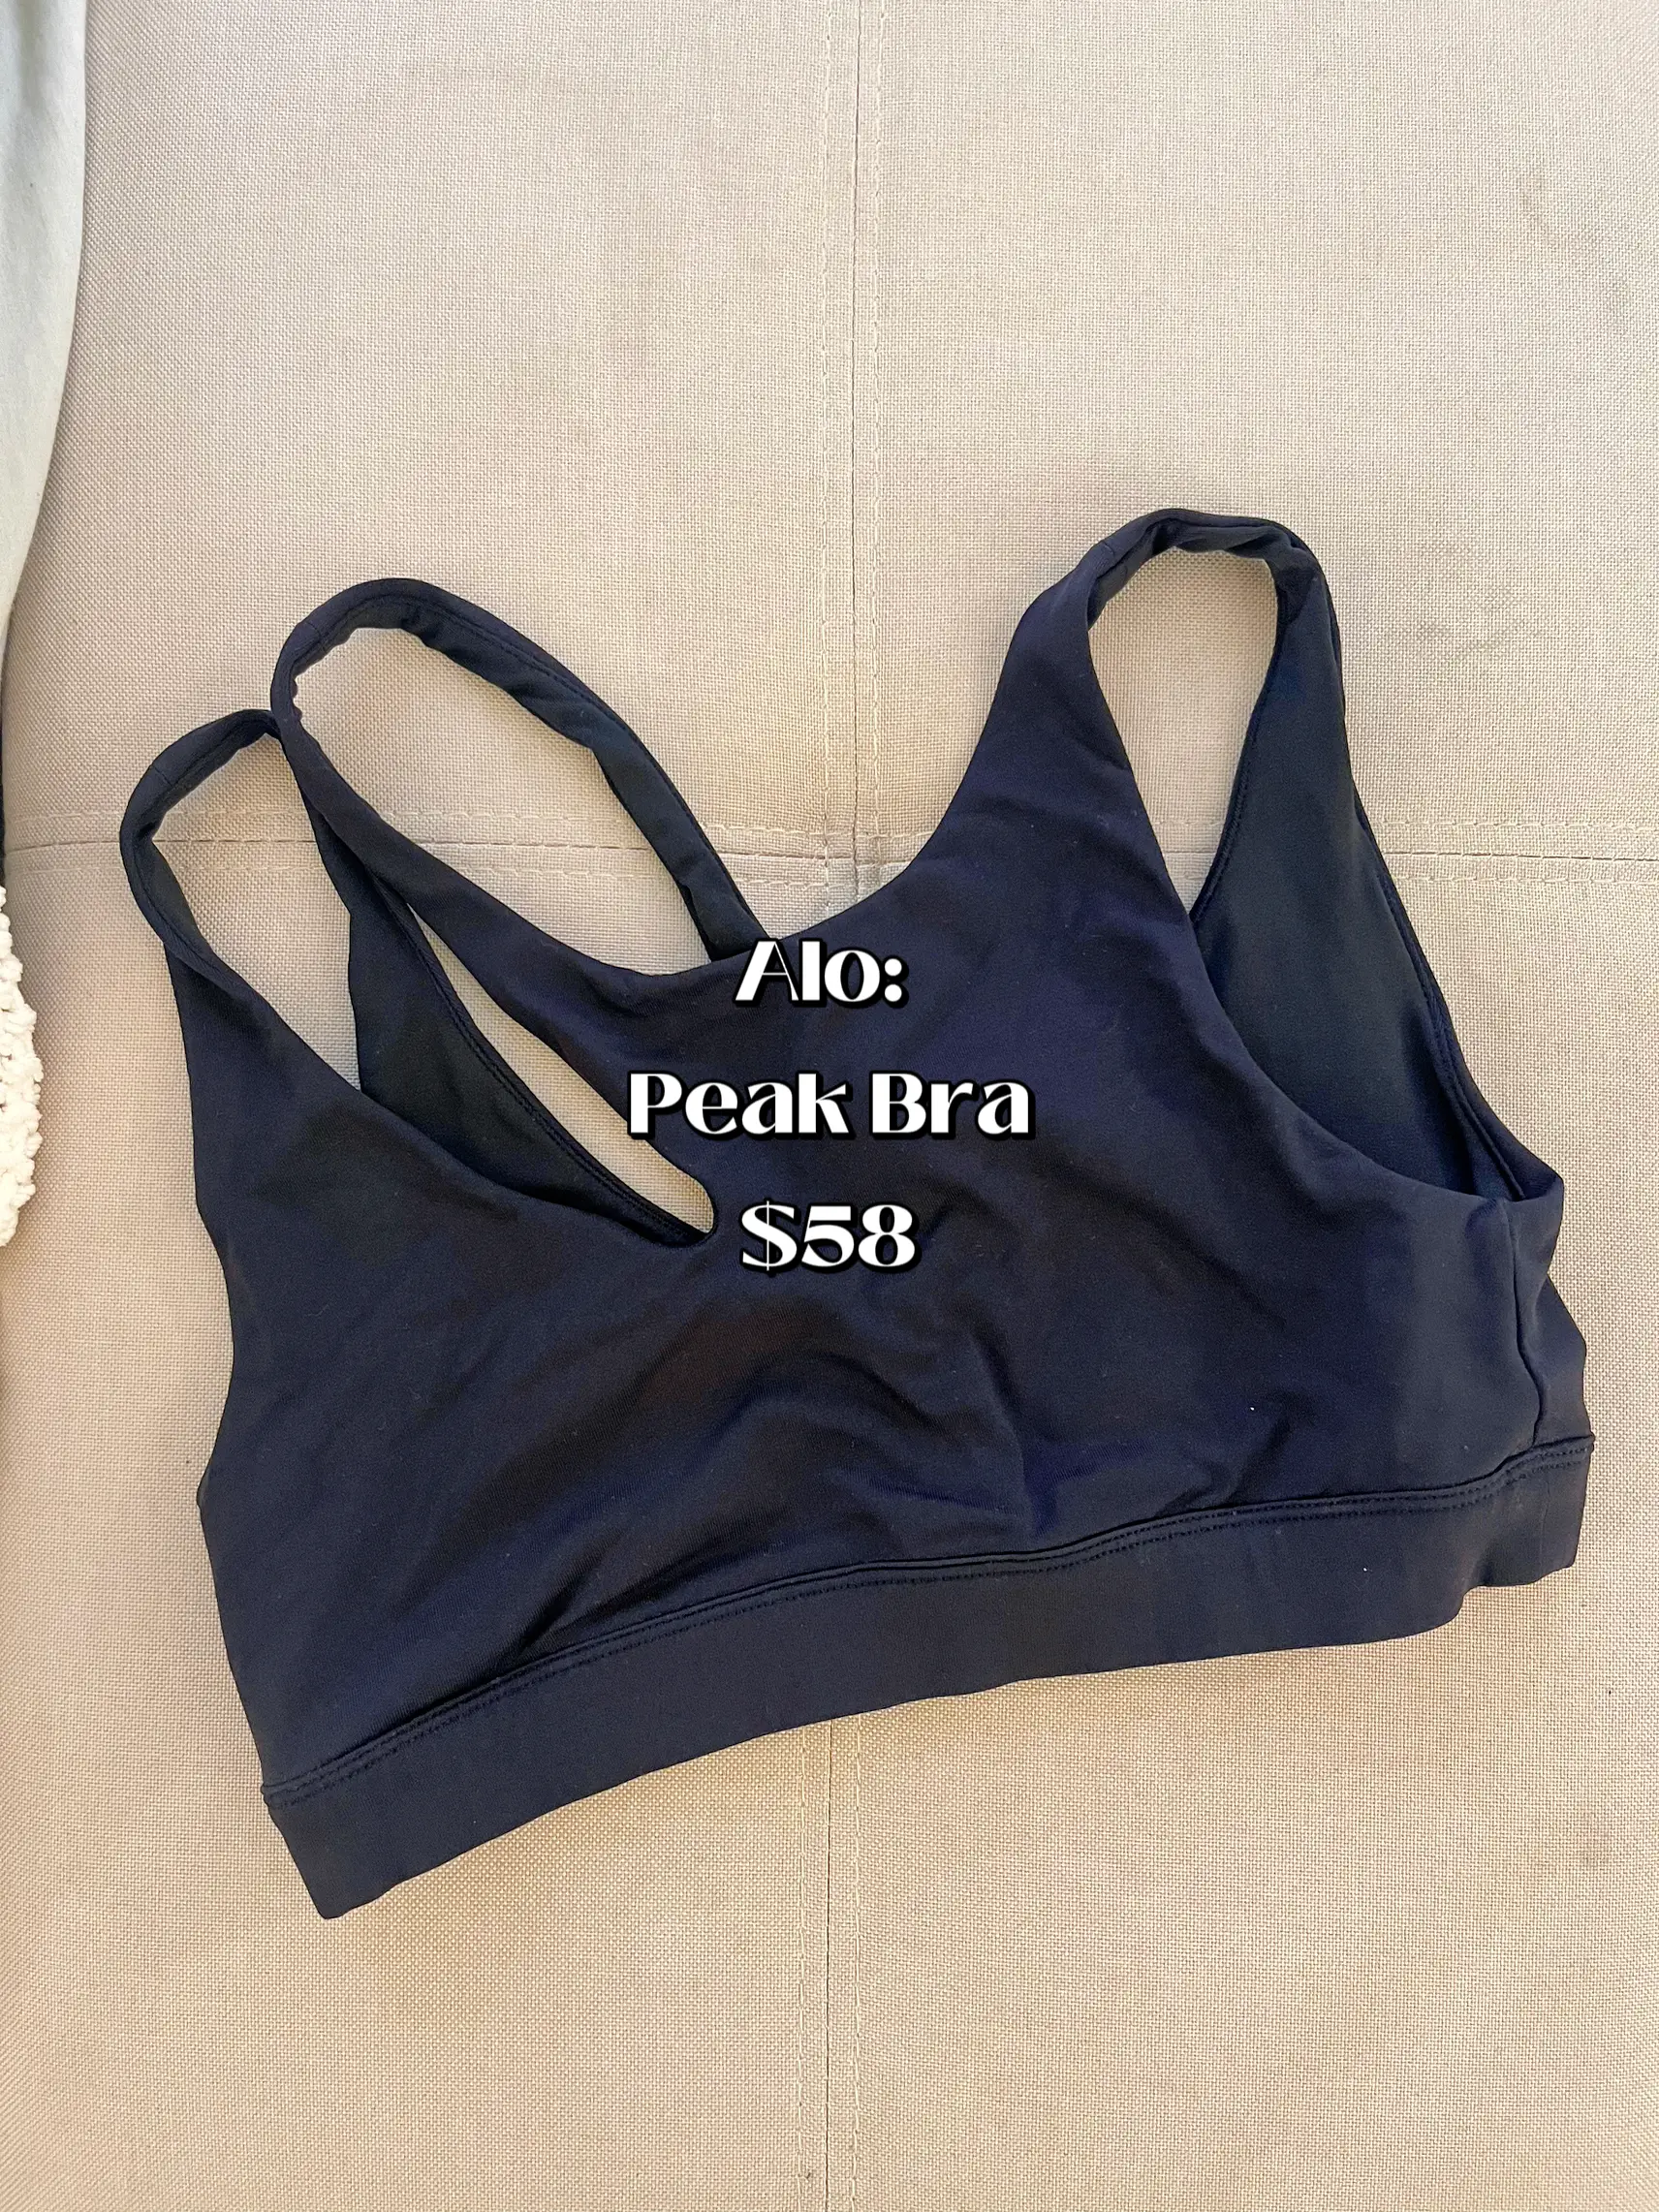 Our Softest Sports Bra - Jules